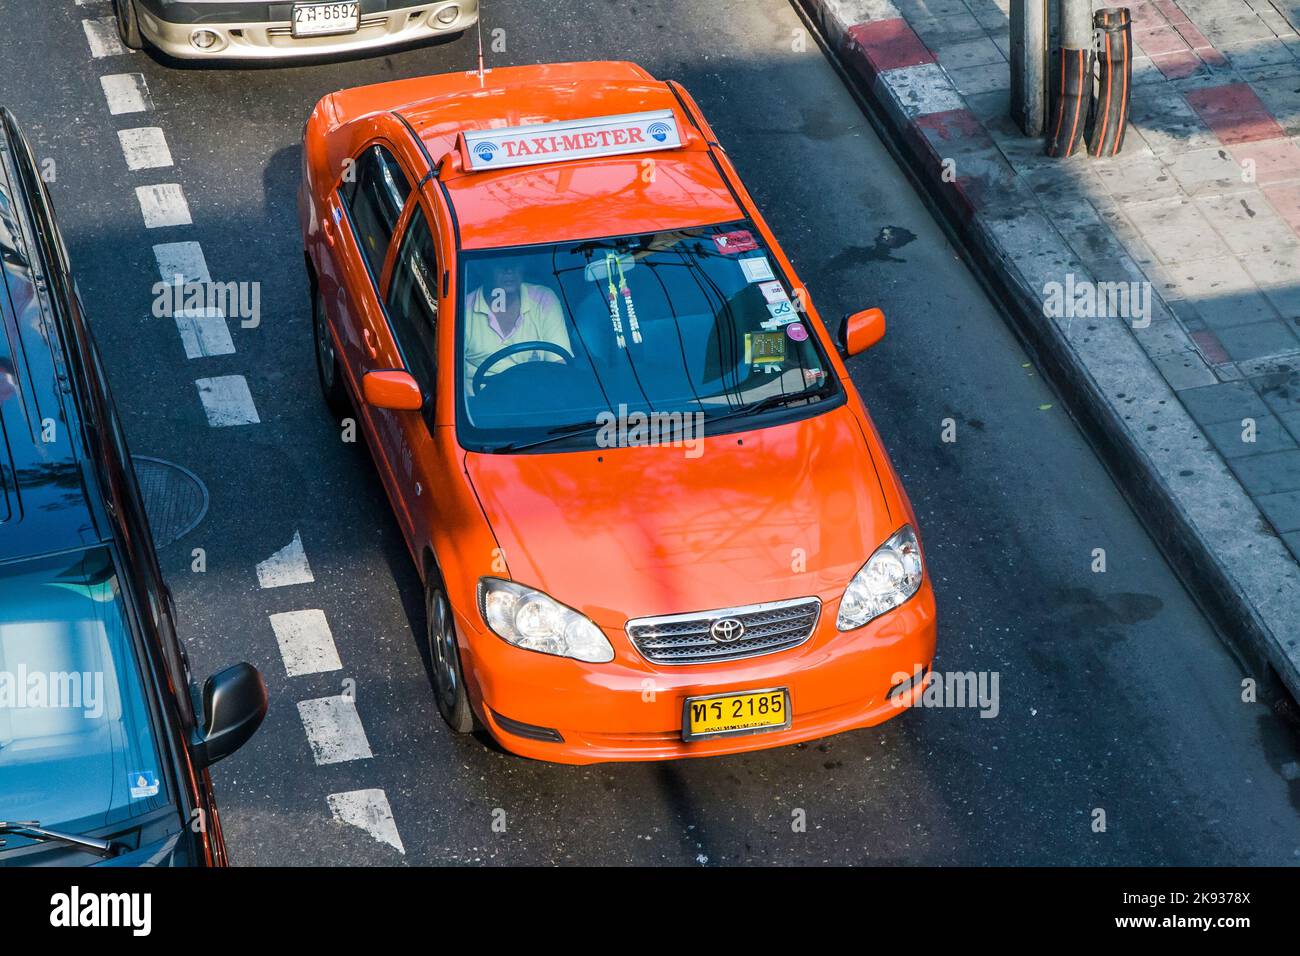 BANGKOK, THAILAND - JAN 9, 2008: taxi driver without passenger in Bangkok, Thailand. There are 150,000 taxis in Bangkok. All taxis are metered with th Stock Photo